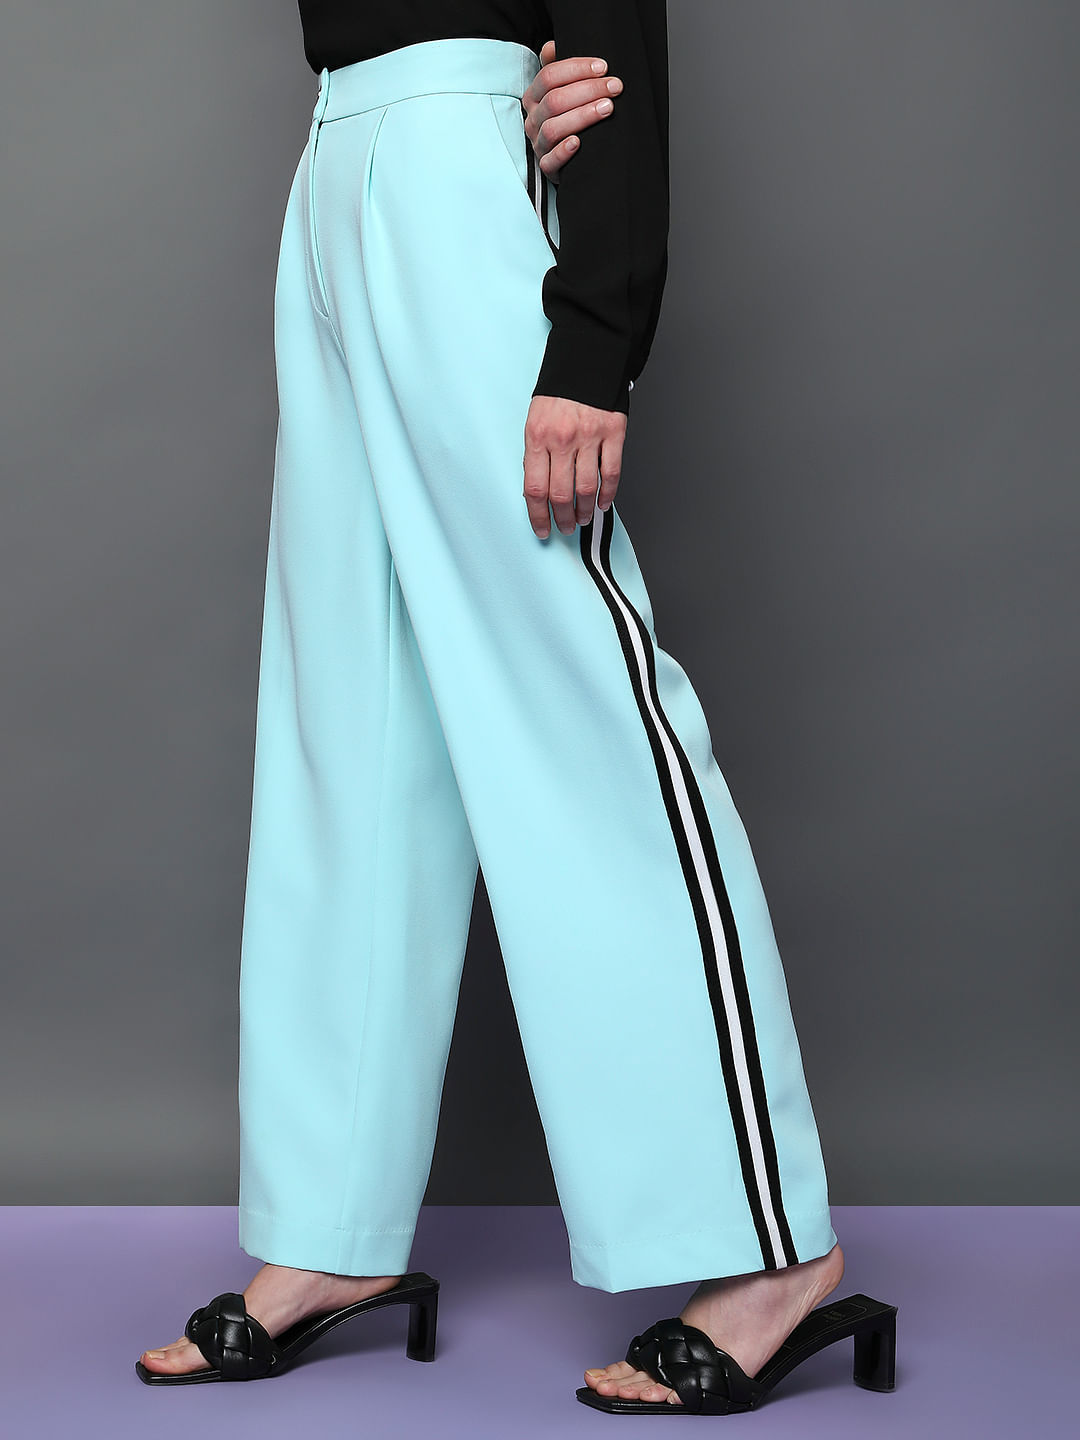 Ladies Sky Blue Cotton Lycra Stretchable Slim Fit Straight Casual Cigarette  Pant at Rs 210/piece | Siraspur | New Delhi | ID: 22603947230